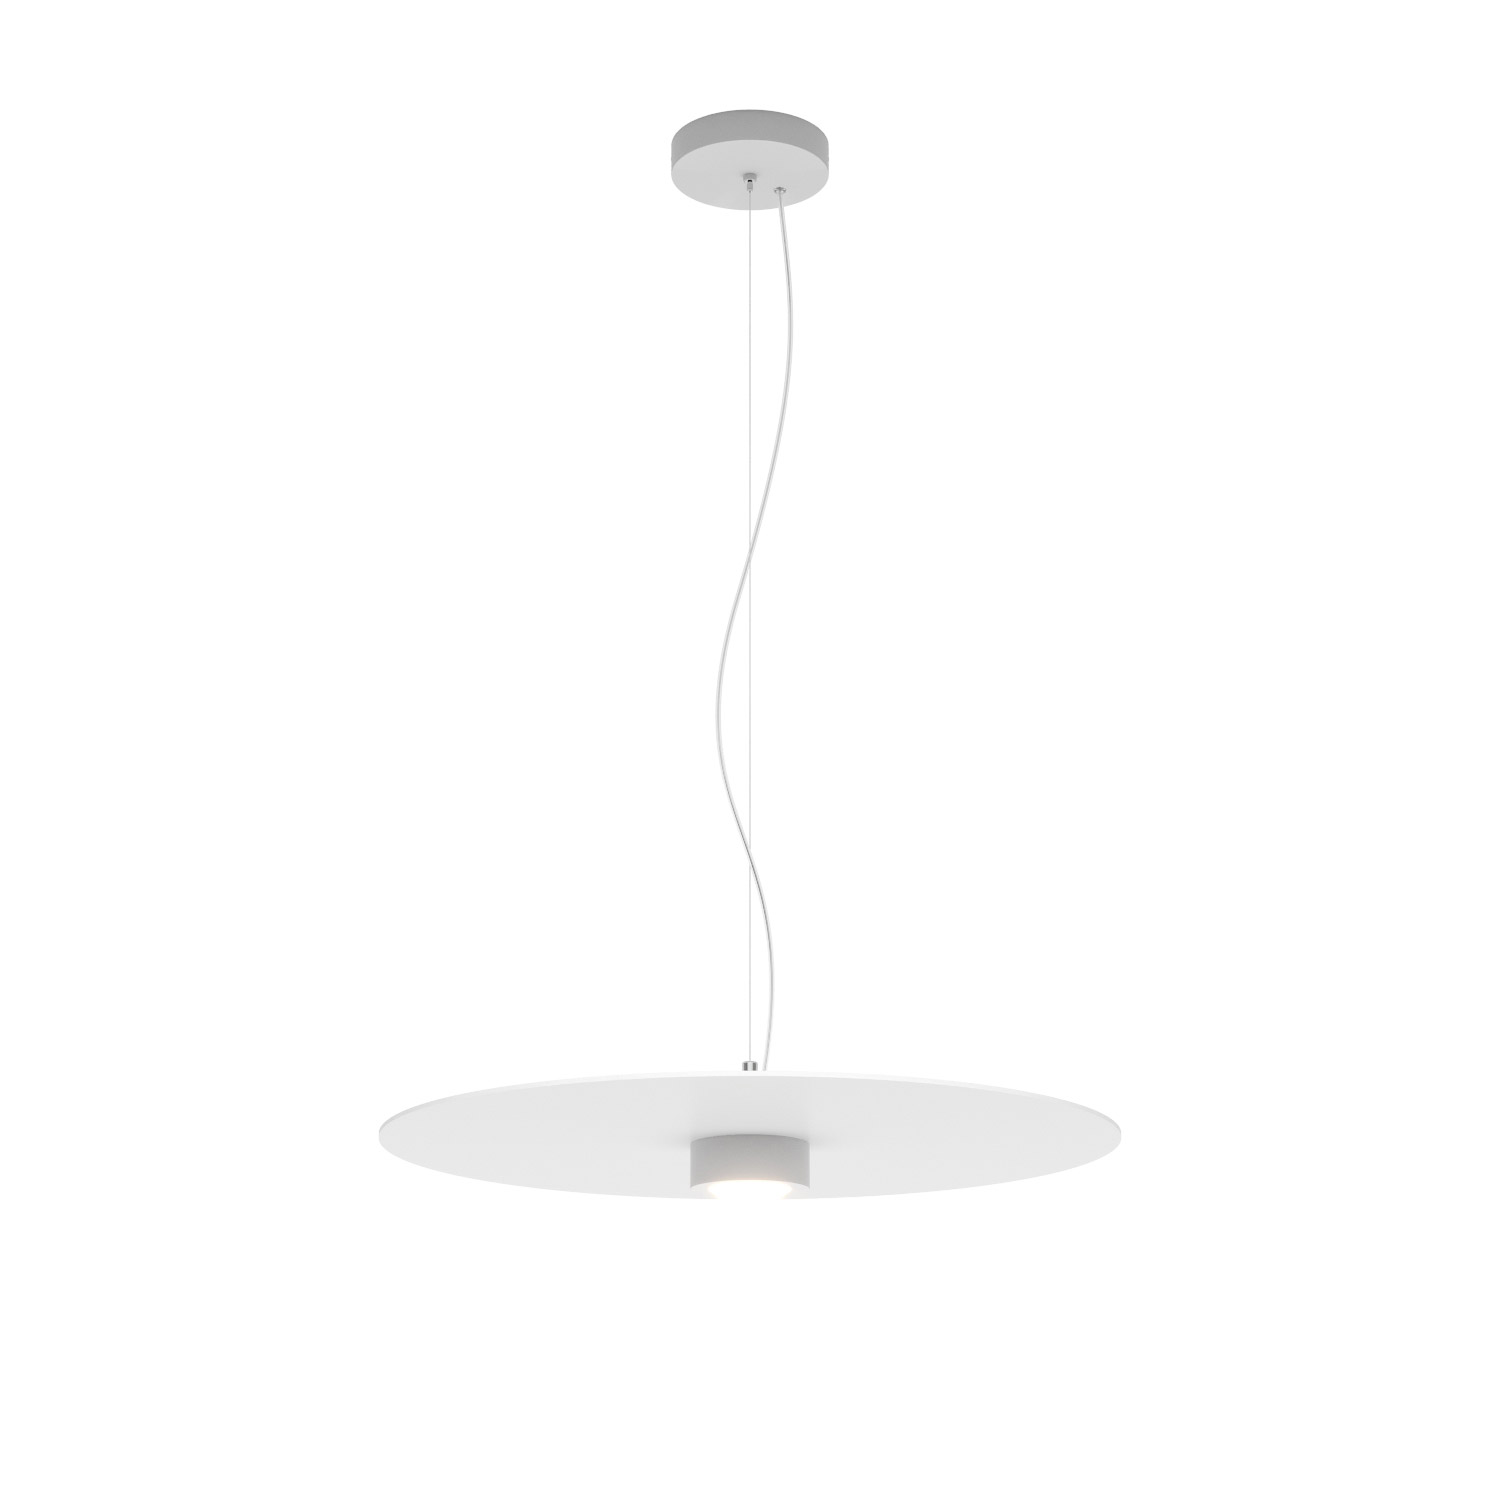 Collide H6 suspension light by Rotaliana